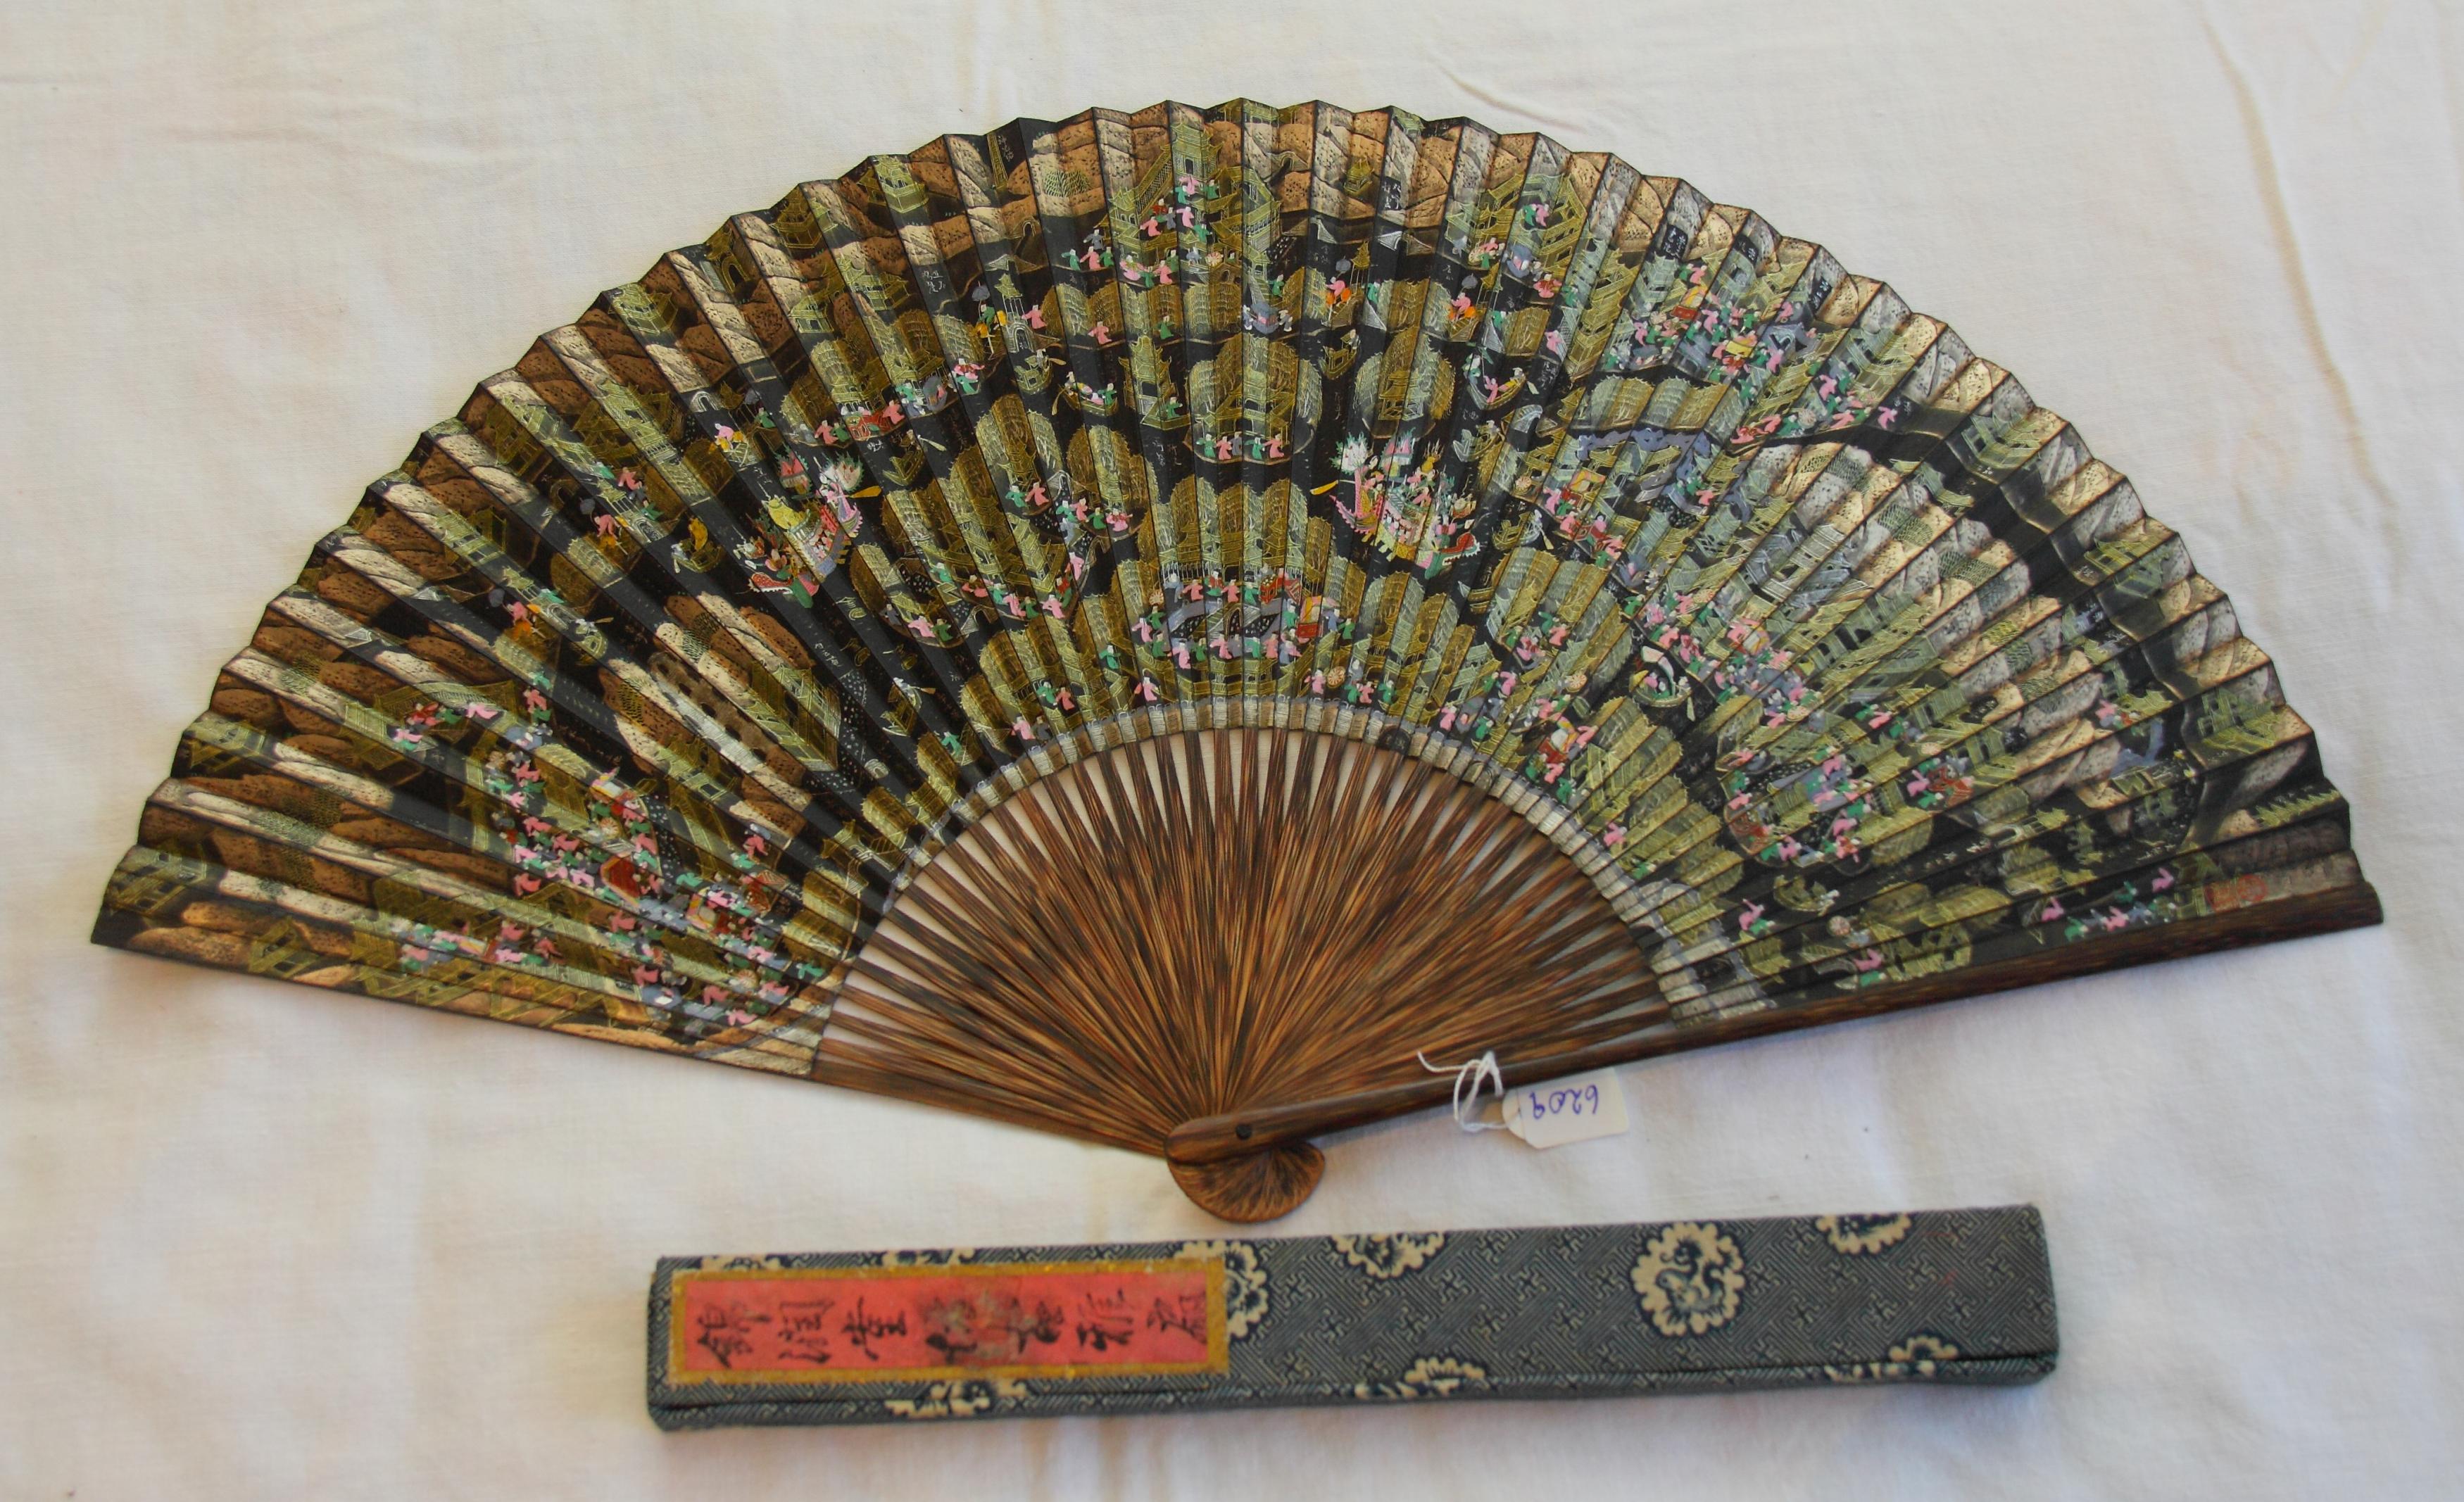 FAN WITH GENRE SCENES AND FAN FROM SHU LIAN JI WITH VIEWS OF THE WEST LAKE AND BUDDHIST TEMPLES. - Image 4 of 14